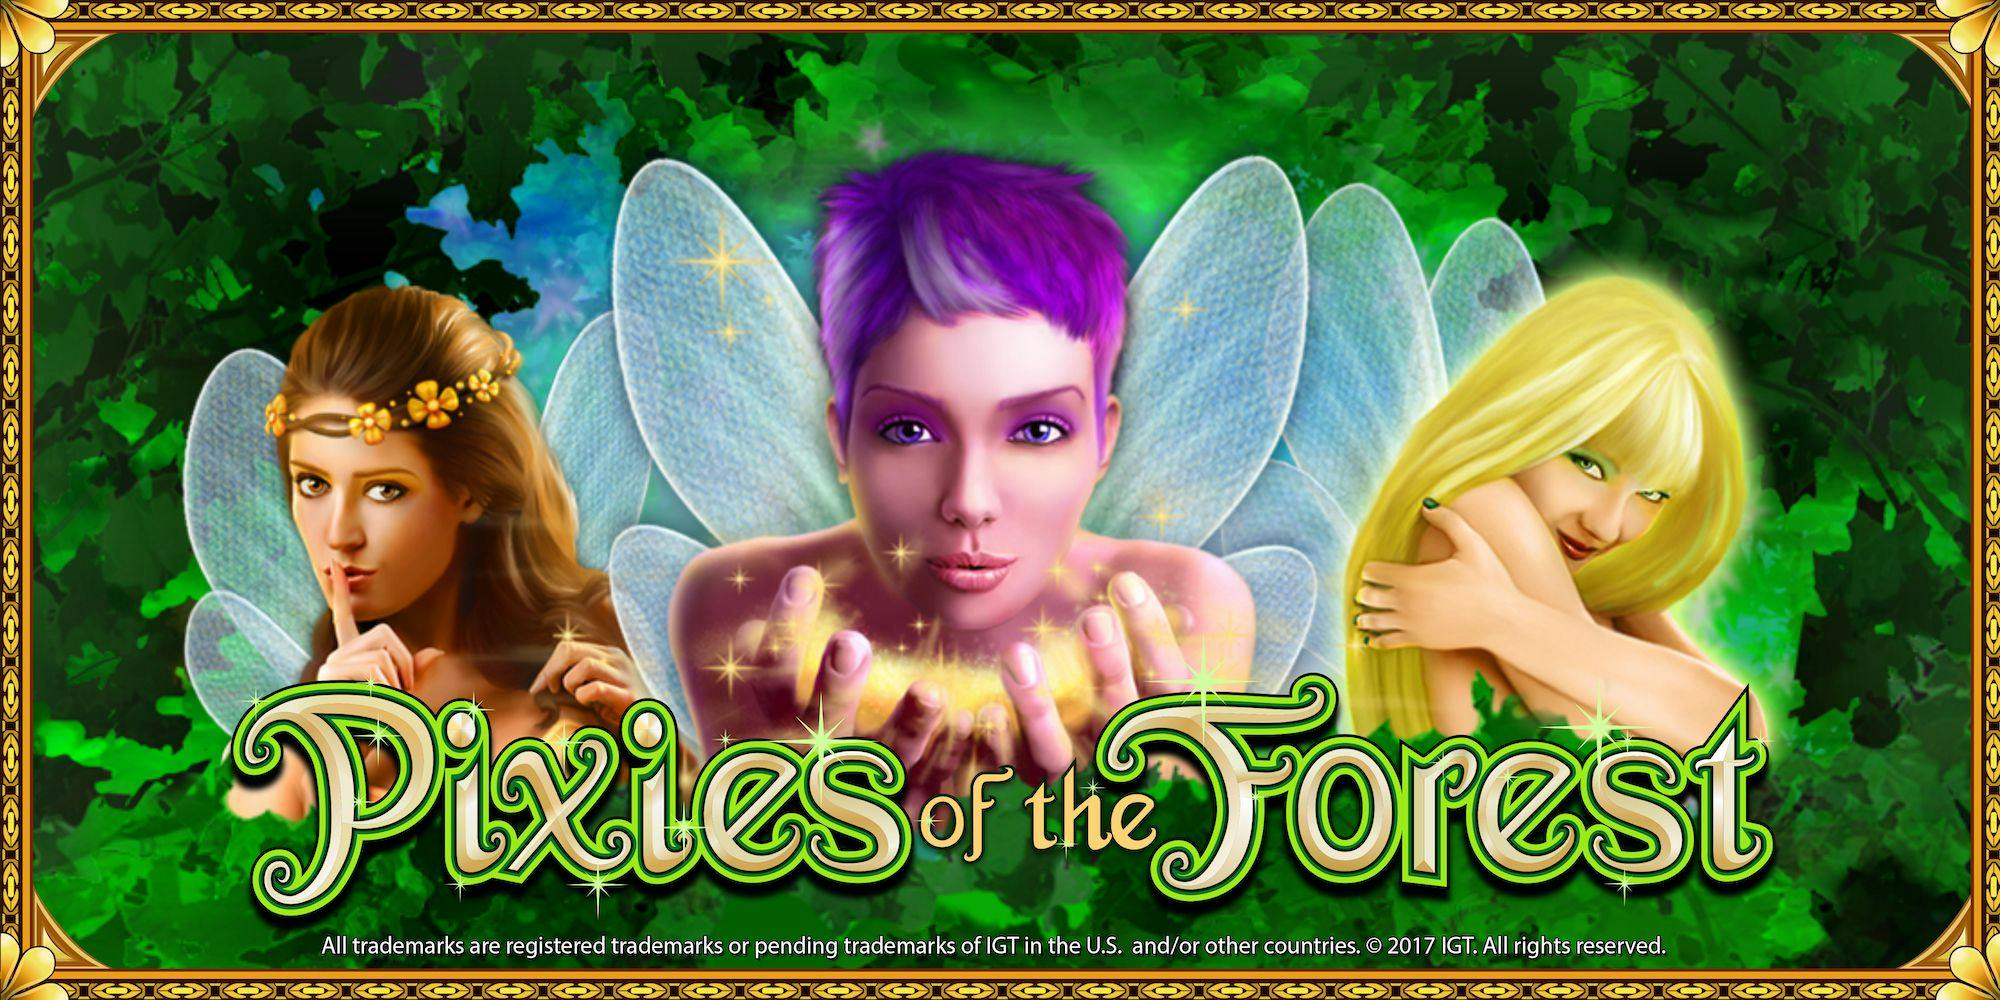 Pixies in the Forest Slot Free Play – Full Guide